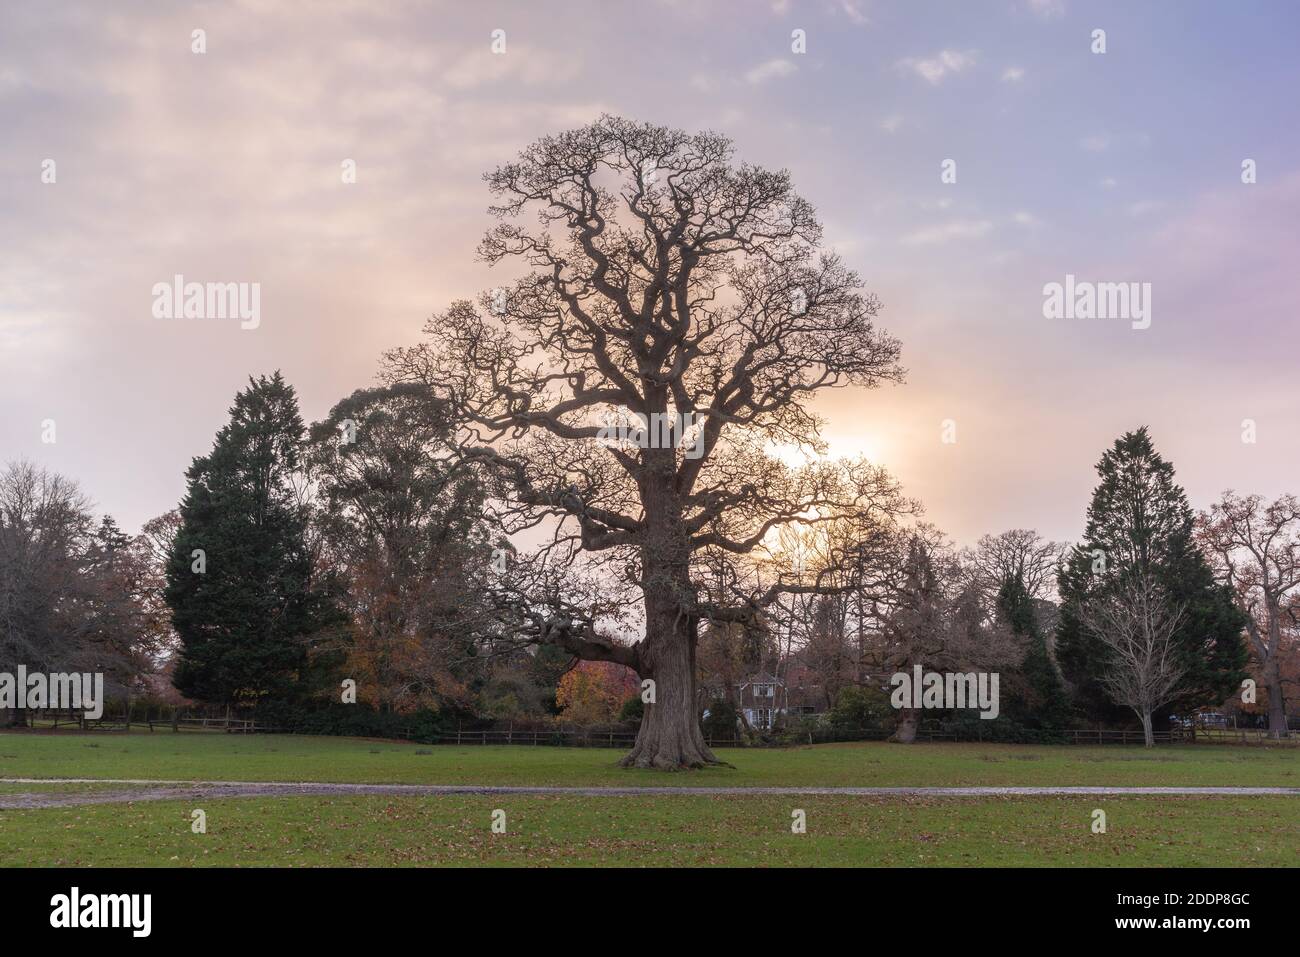 Large old English Oak tree (Quercus robur) with no foliage left during autumn in Burley in the New Forest National Park, Hampshire, England, UK Stock Photo